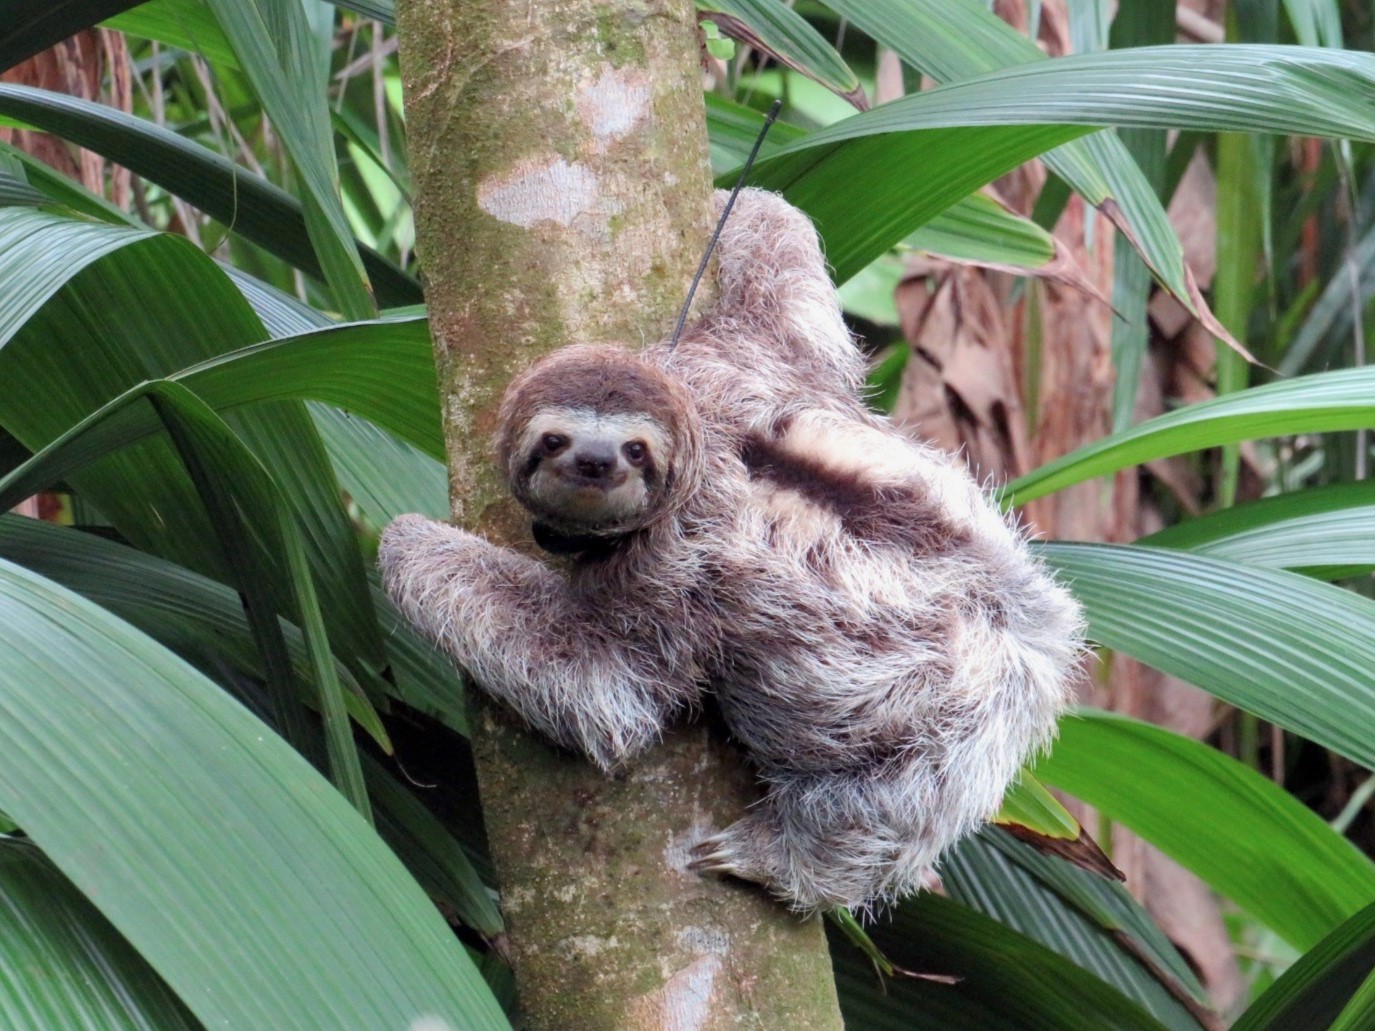 Costa Rica sloth with tracking collar shown in a tree